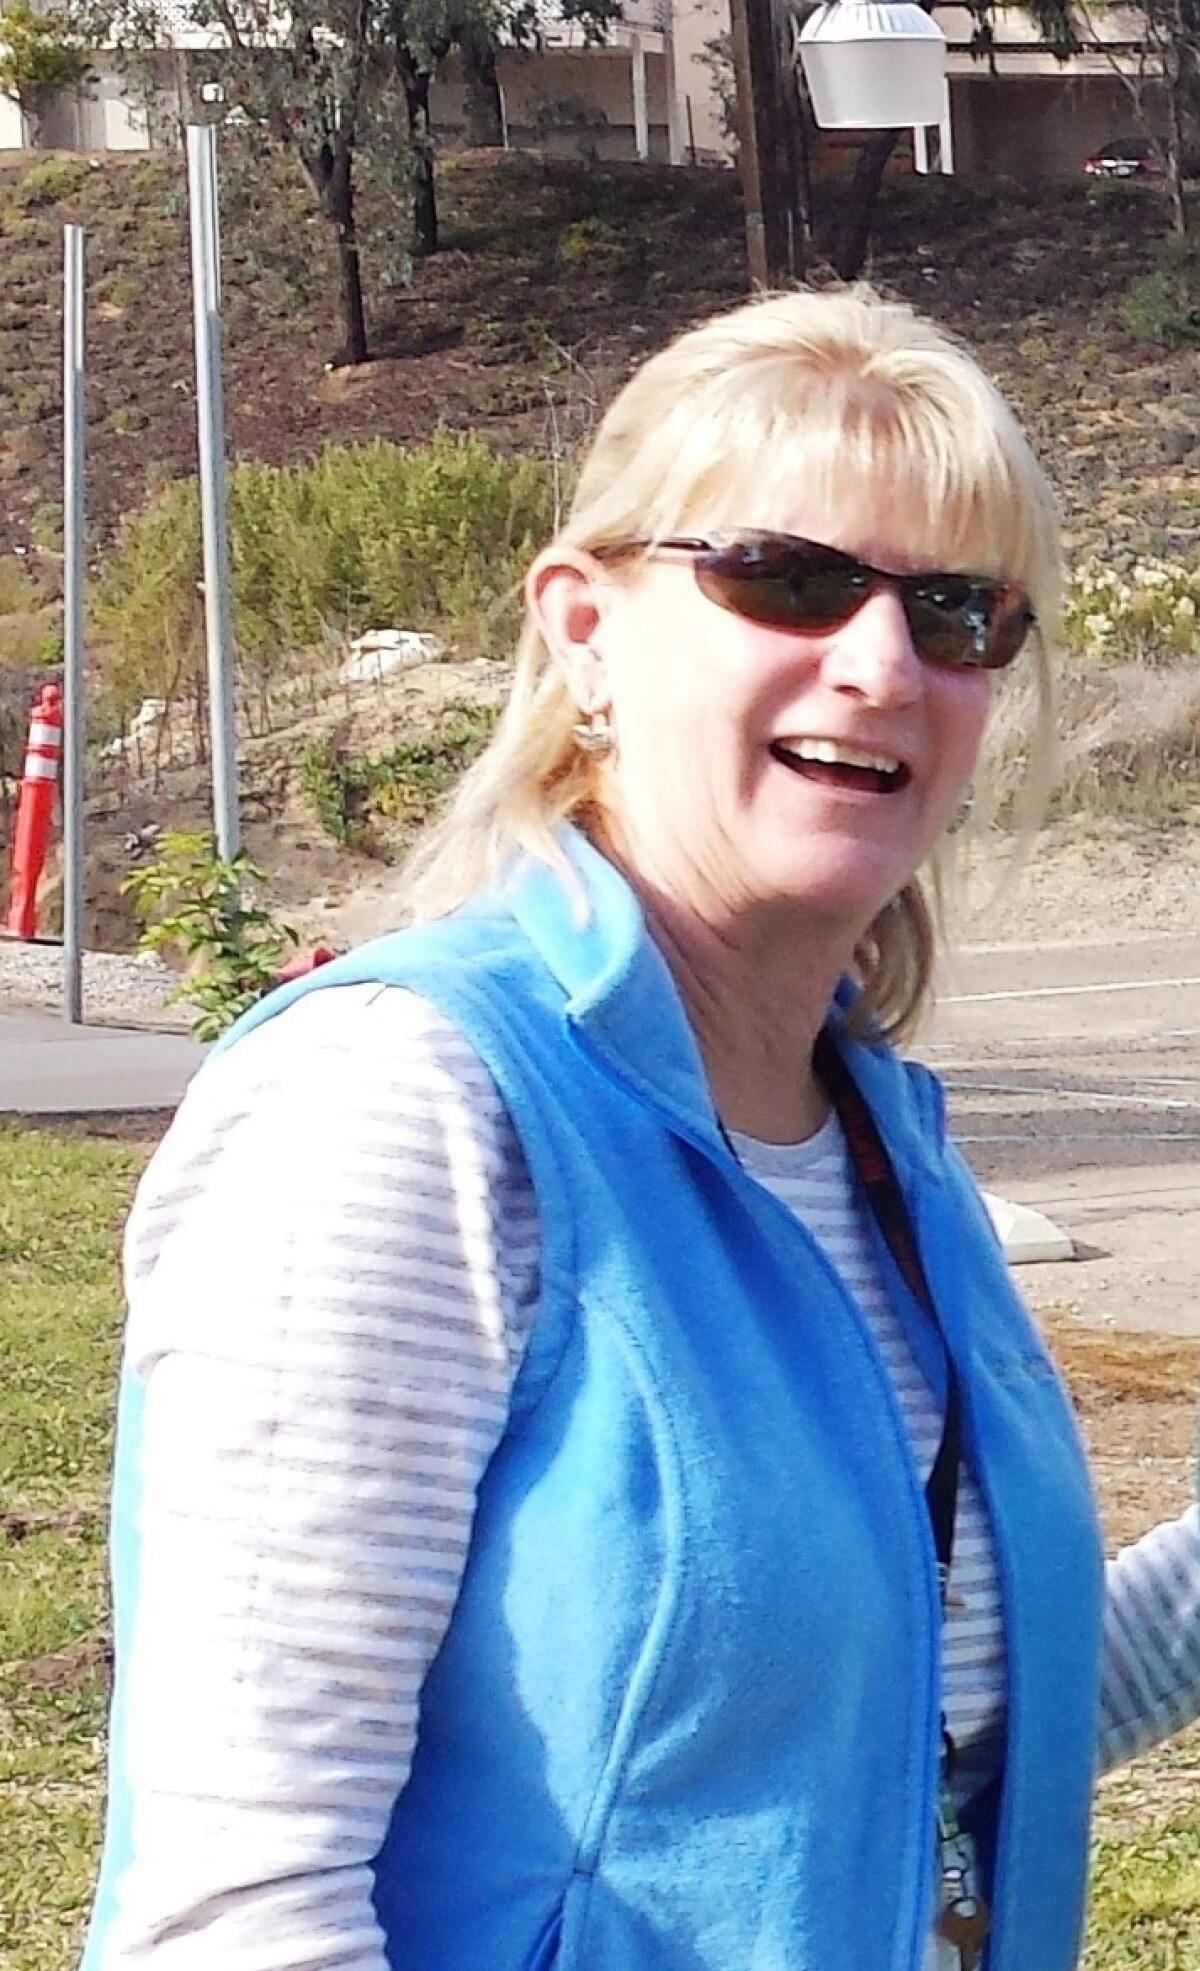 Jane Semelsberger started at La Jolla Meals on Wheels in 2003 as a coordinator and became program director five years later.